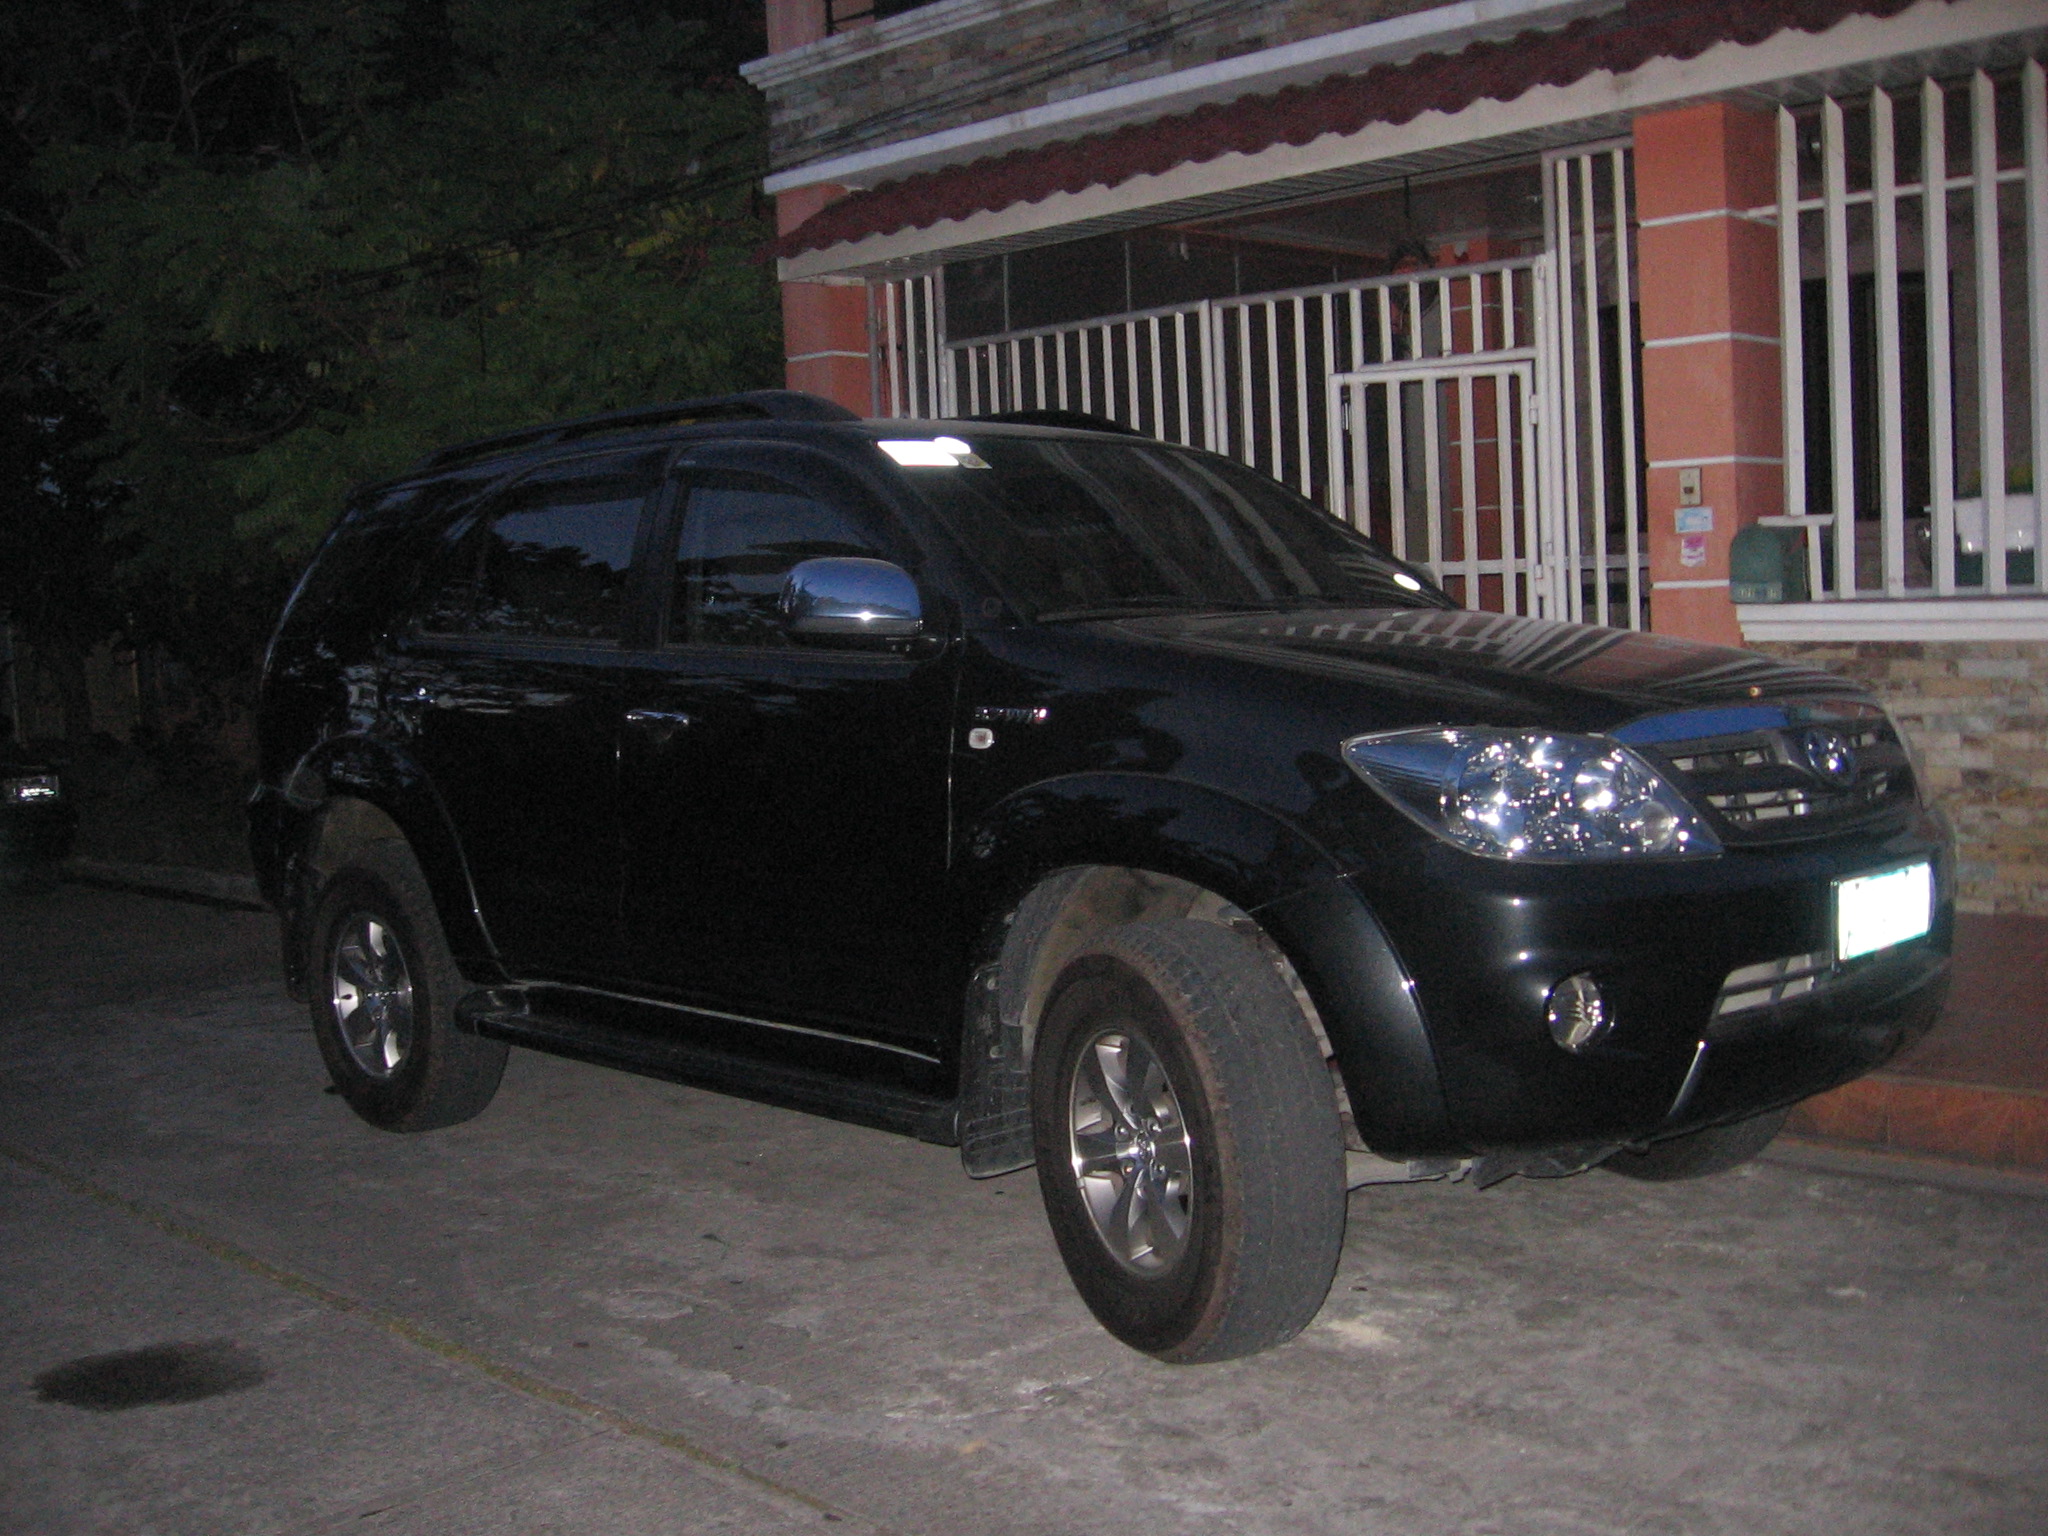 Toyota Fortuner Hd Wallpaper For Pc